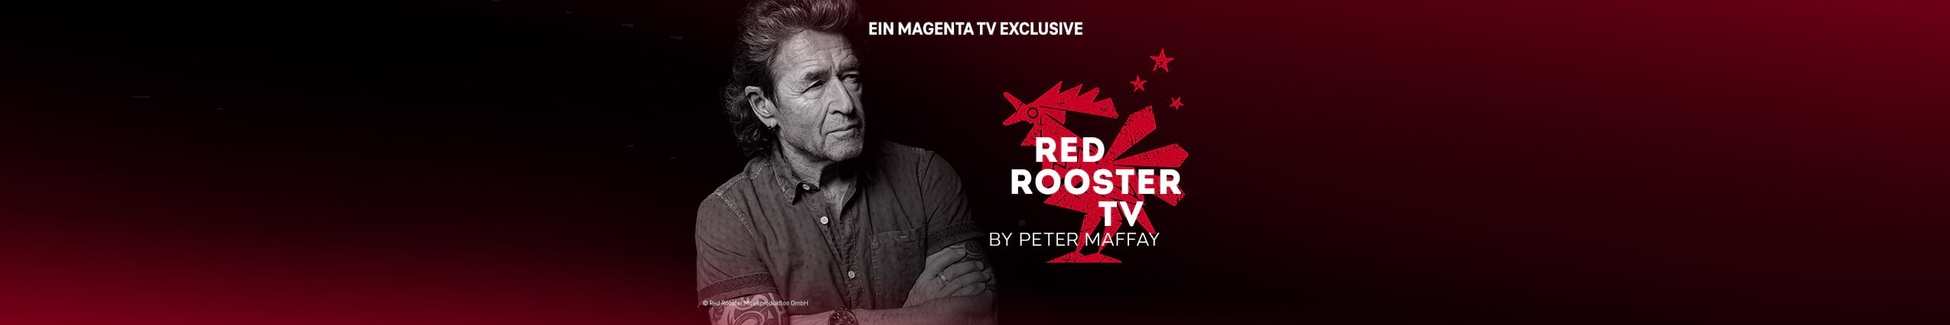 MagentaTV: Red Rooster TV by Peter Maffay